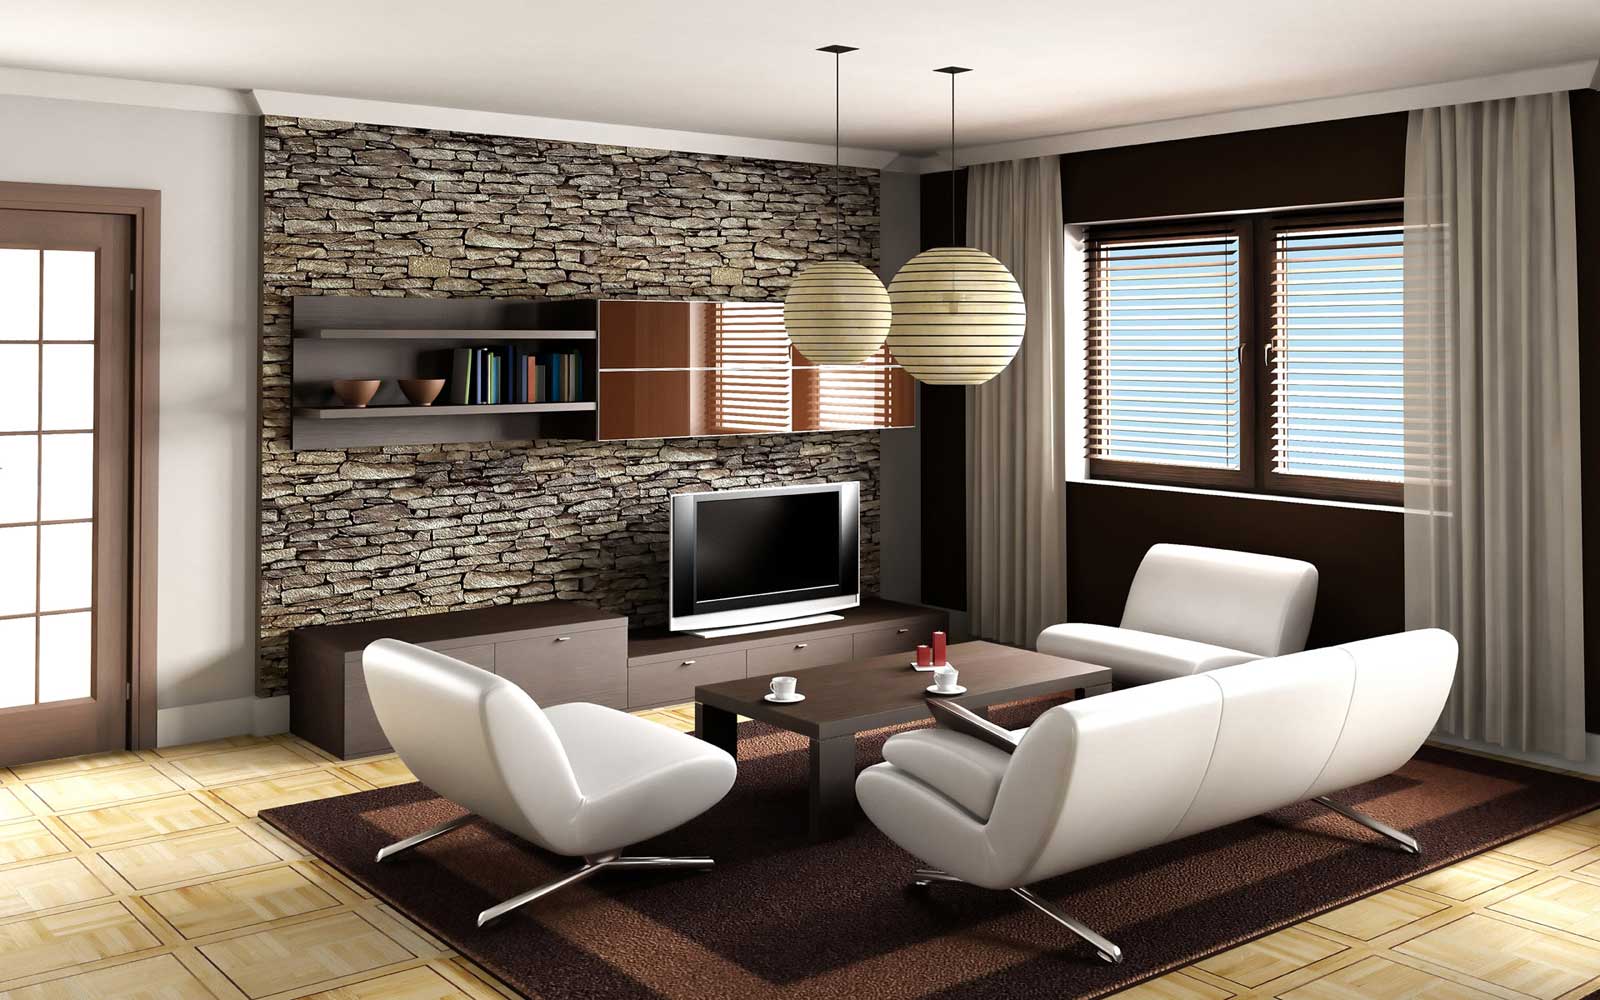 Room Decor Modern Living Room Decor Ideas With Modern Design Using White Sofa And Stone Wall Decoration Completed With Wooden TV Cabinet Living Room Trendy Living Room Decoration For Chic Modern Home Interiors